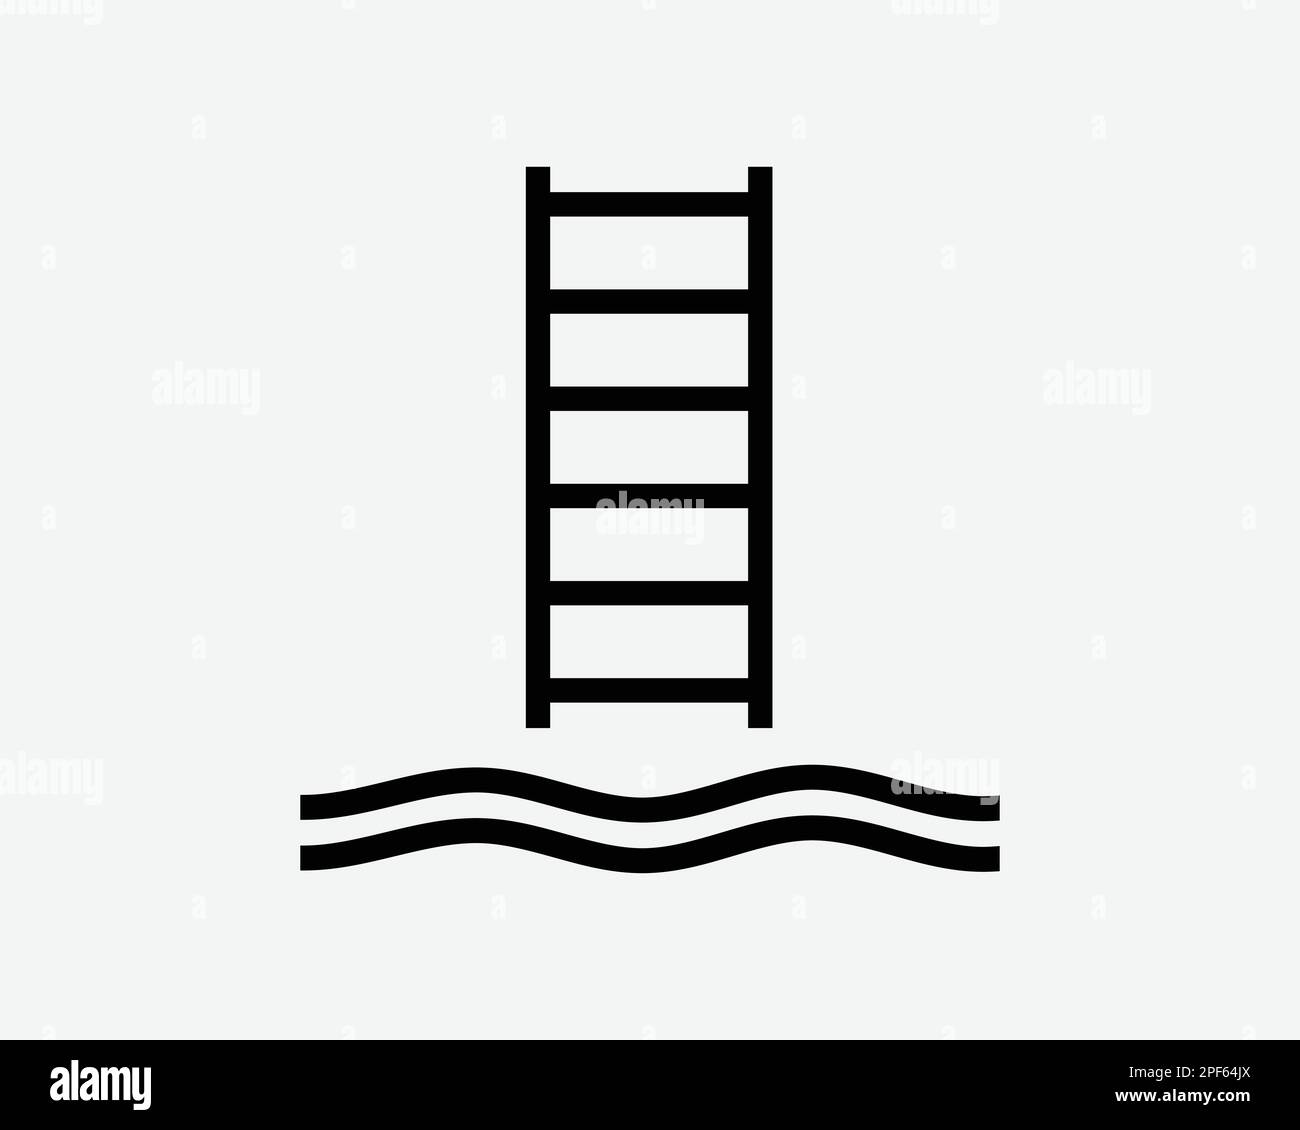 Embarkation Pilot Ladder Stairs Up Down Water Vessel Boat Black White Silhouette Sign Symbol Icon Clipart Graphic Artwork Pictogram Illustration Vecto Stock Vector